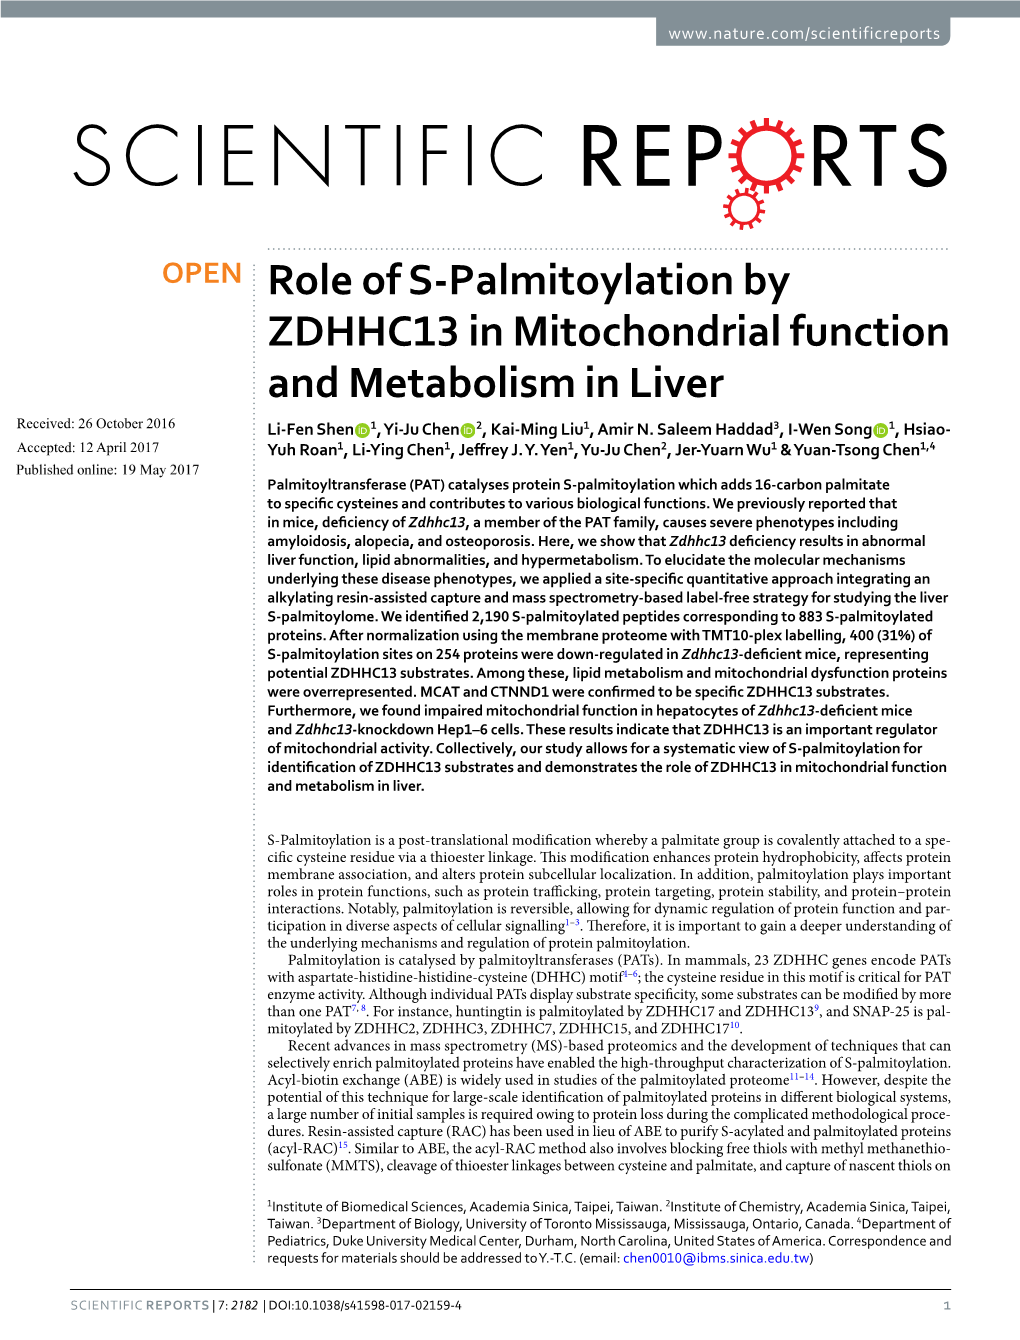 Role of S-Palmitoylation by ZDHHC13 in Mitochondrial Function and Metabolism in Liver Received: 26 October 2016 Li-Fen Shen 1, Yi-Ju Chen 2, Kai-Ming Liu1, Amir N